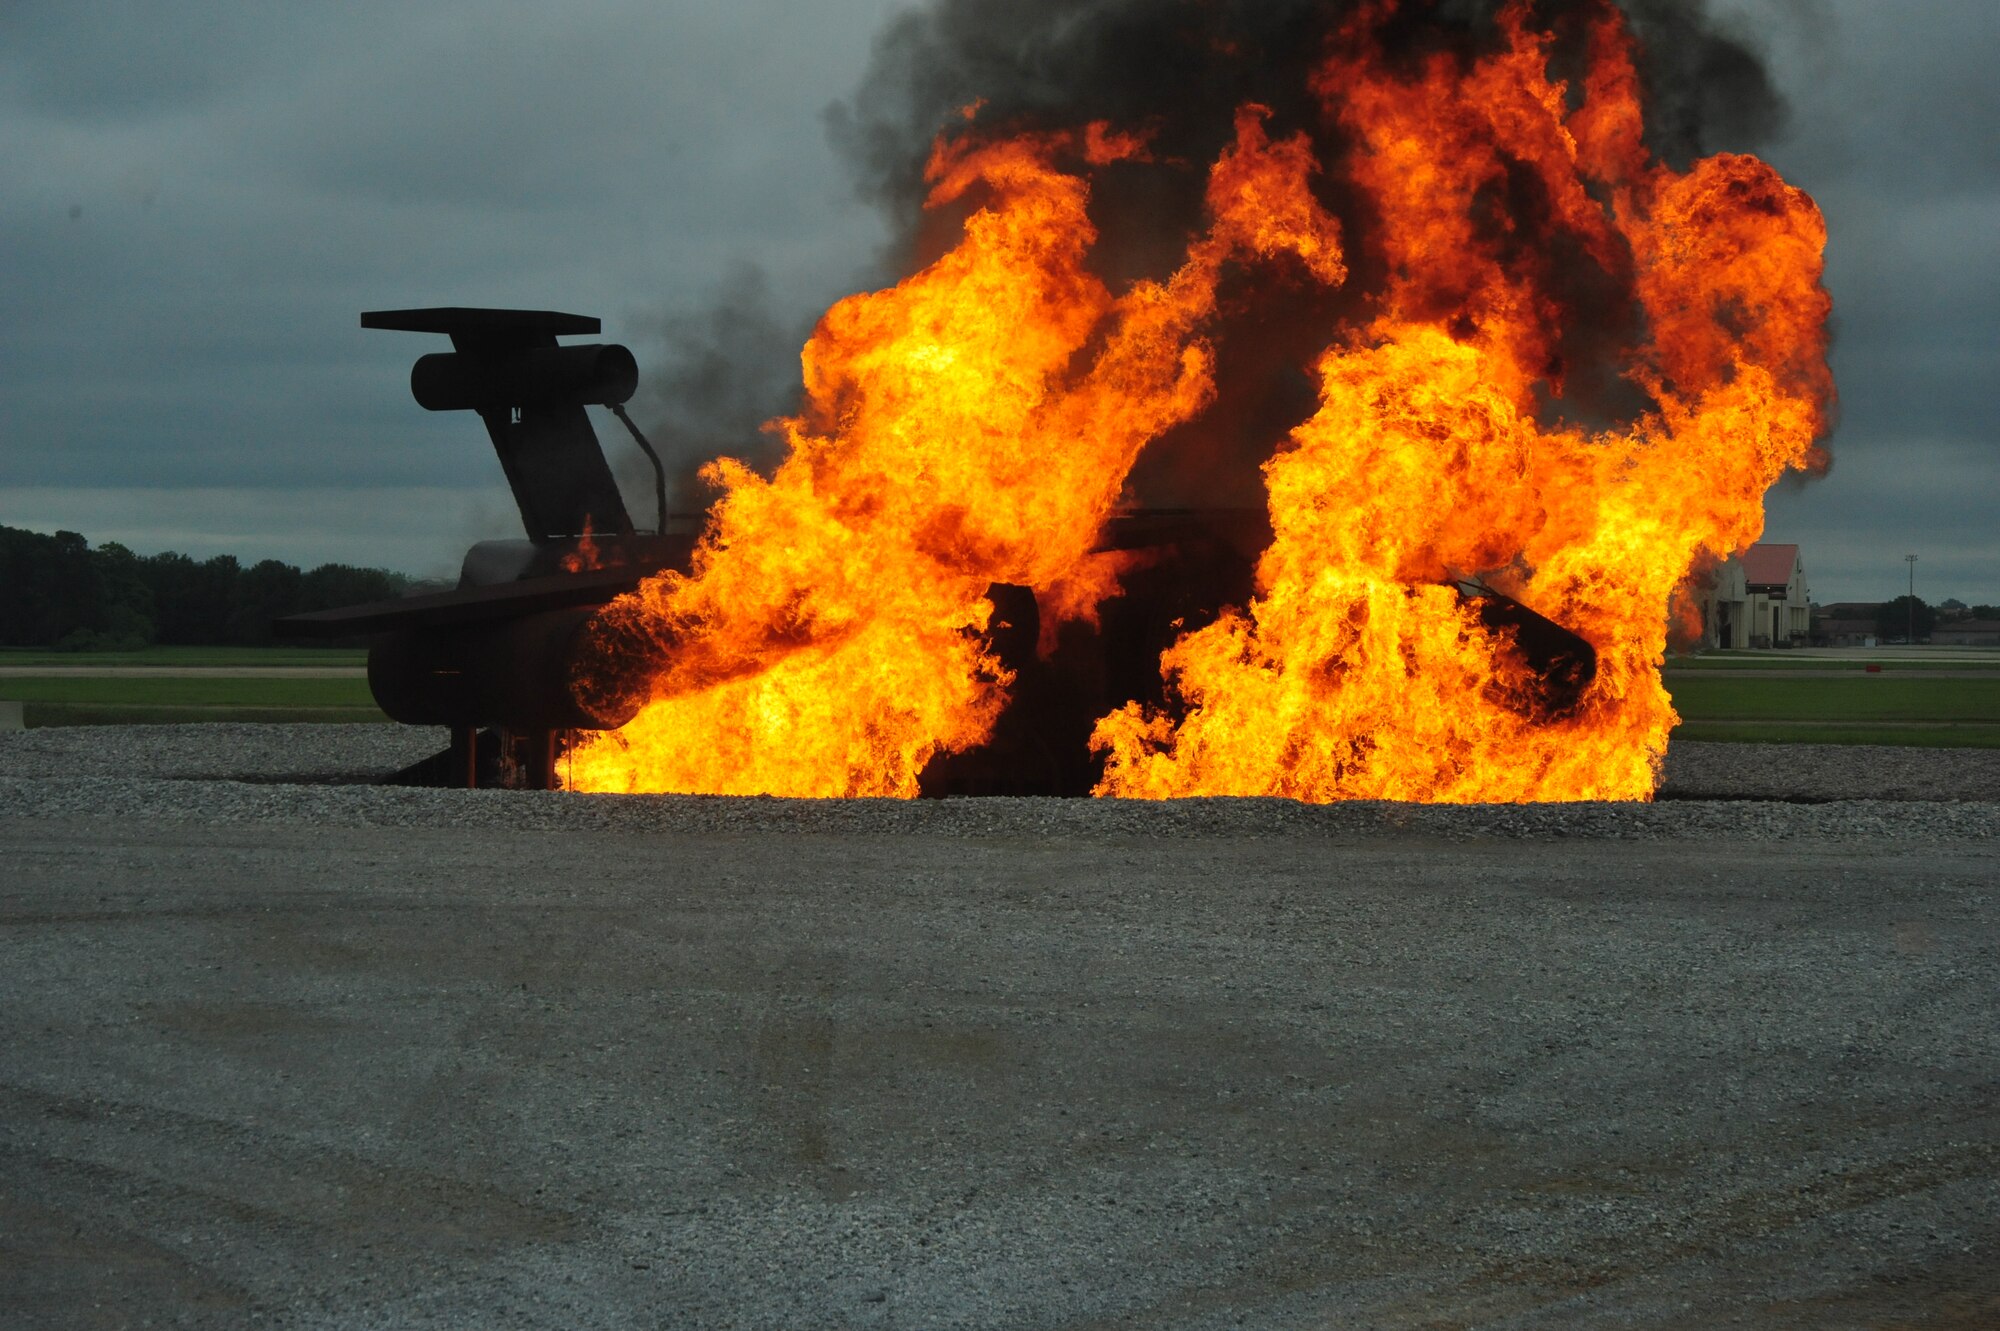 A simulated aircraft is ignited to begin a training exercise at Maxwell Air Force Base on April 19. The flames are switched on and off manually to ensure the situation is handled properly. (Air Force photo by Airman 1st Class William Blankenship)